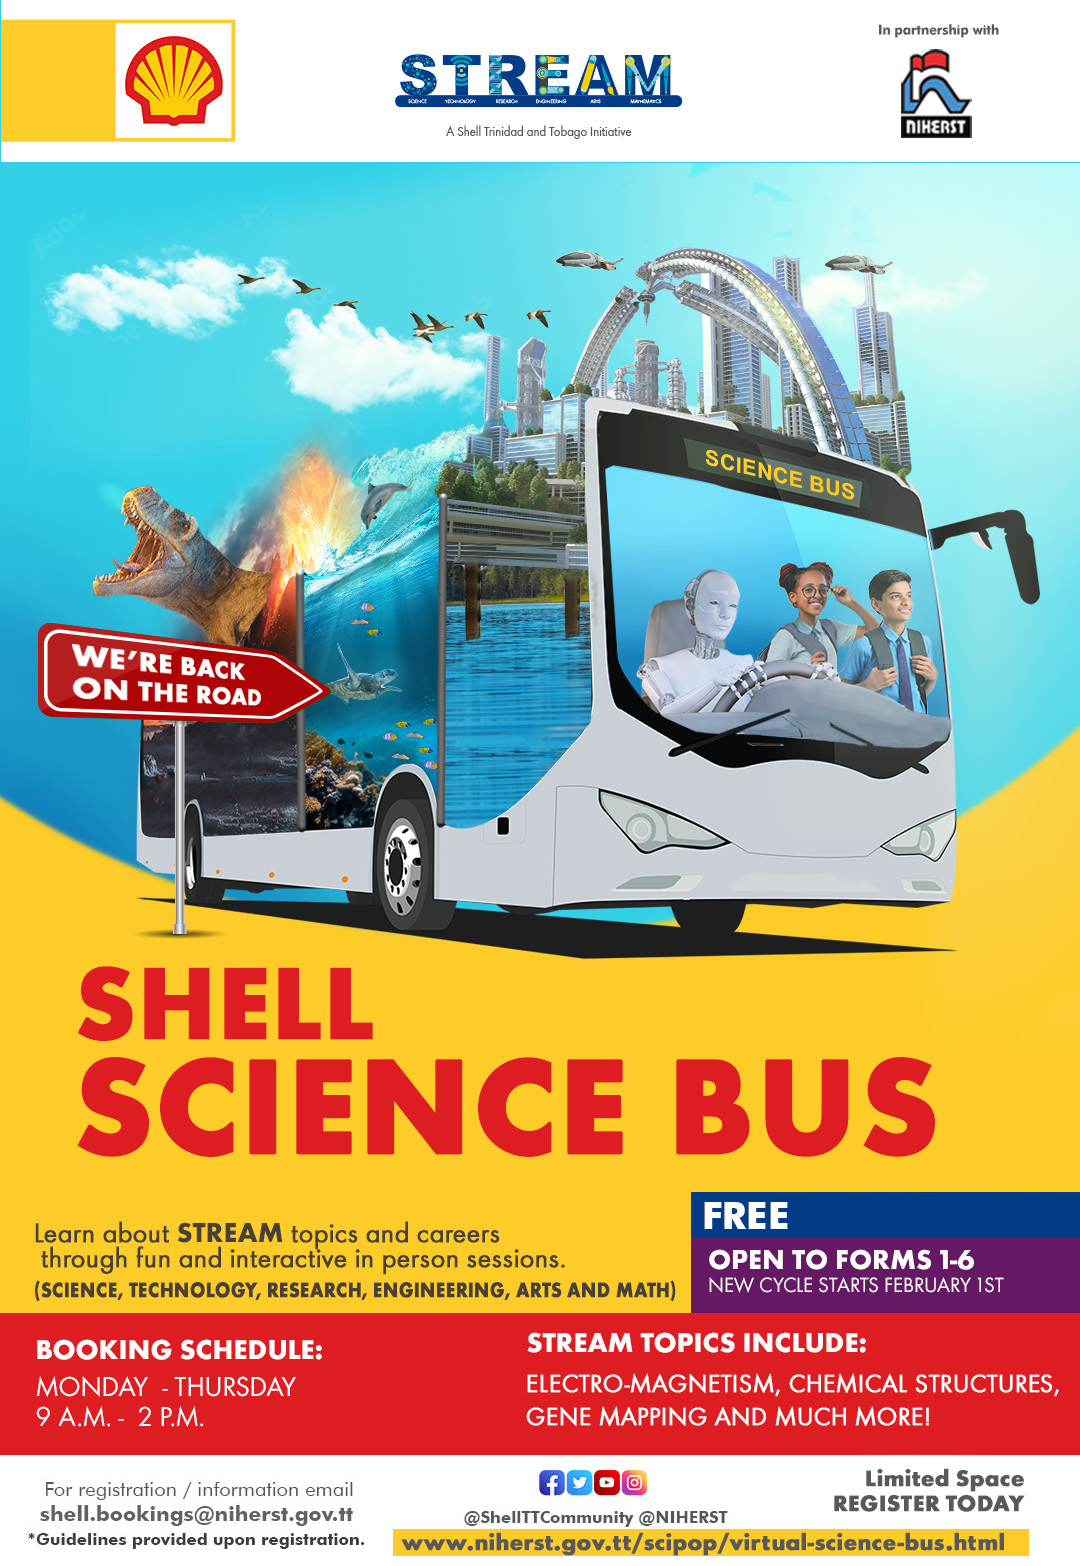 Shell STREAM Virtual Science Bus - powered by NIHERST